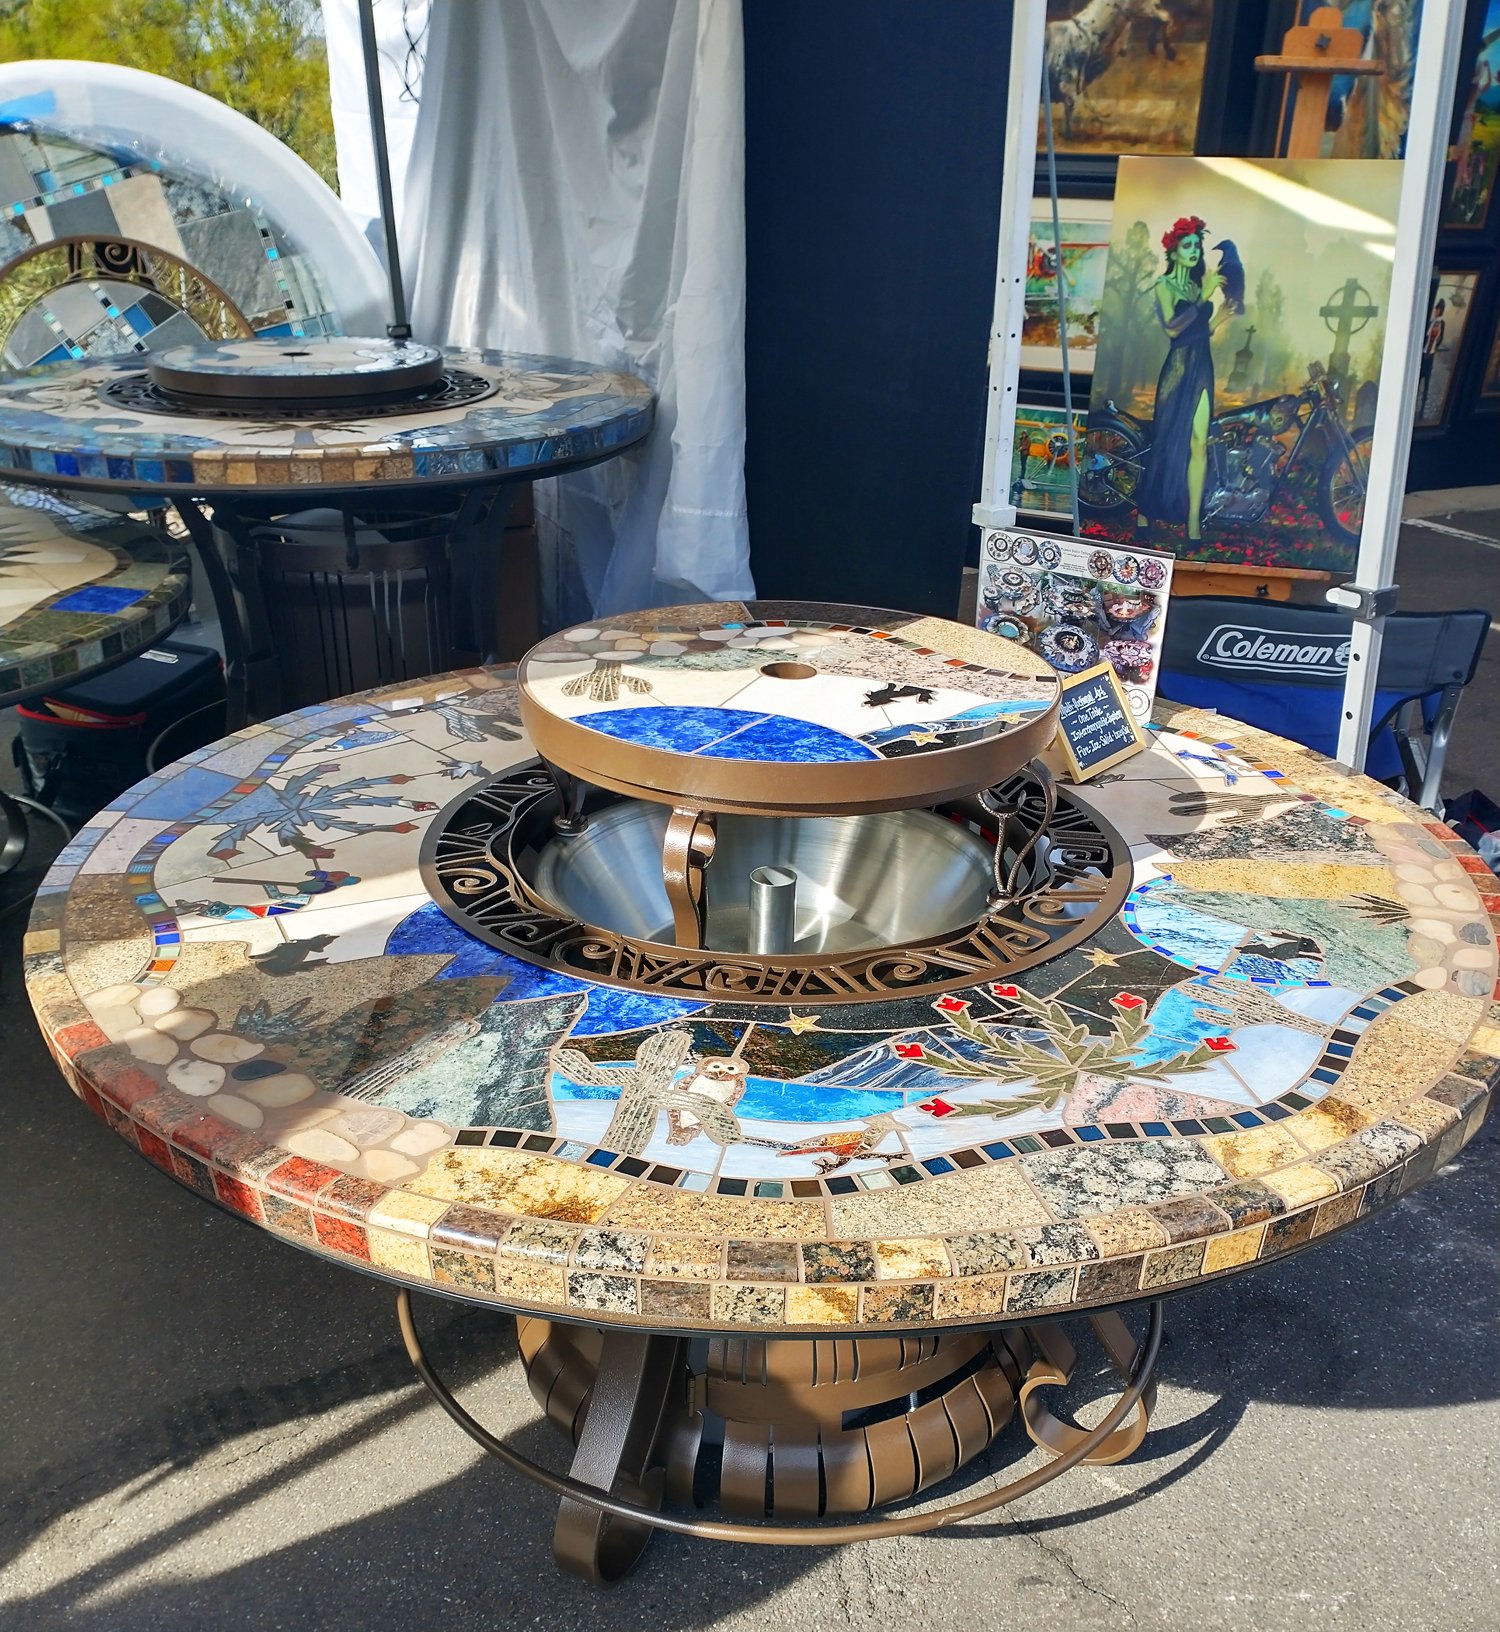 5900$ for this fire pit table.